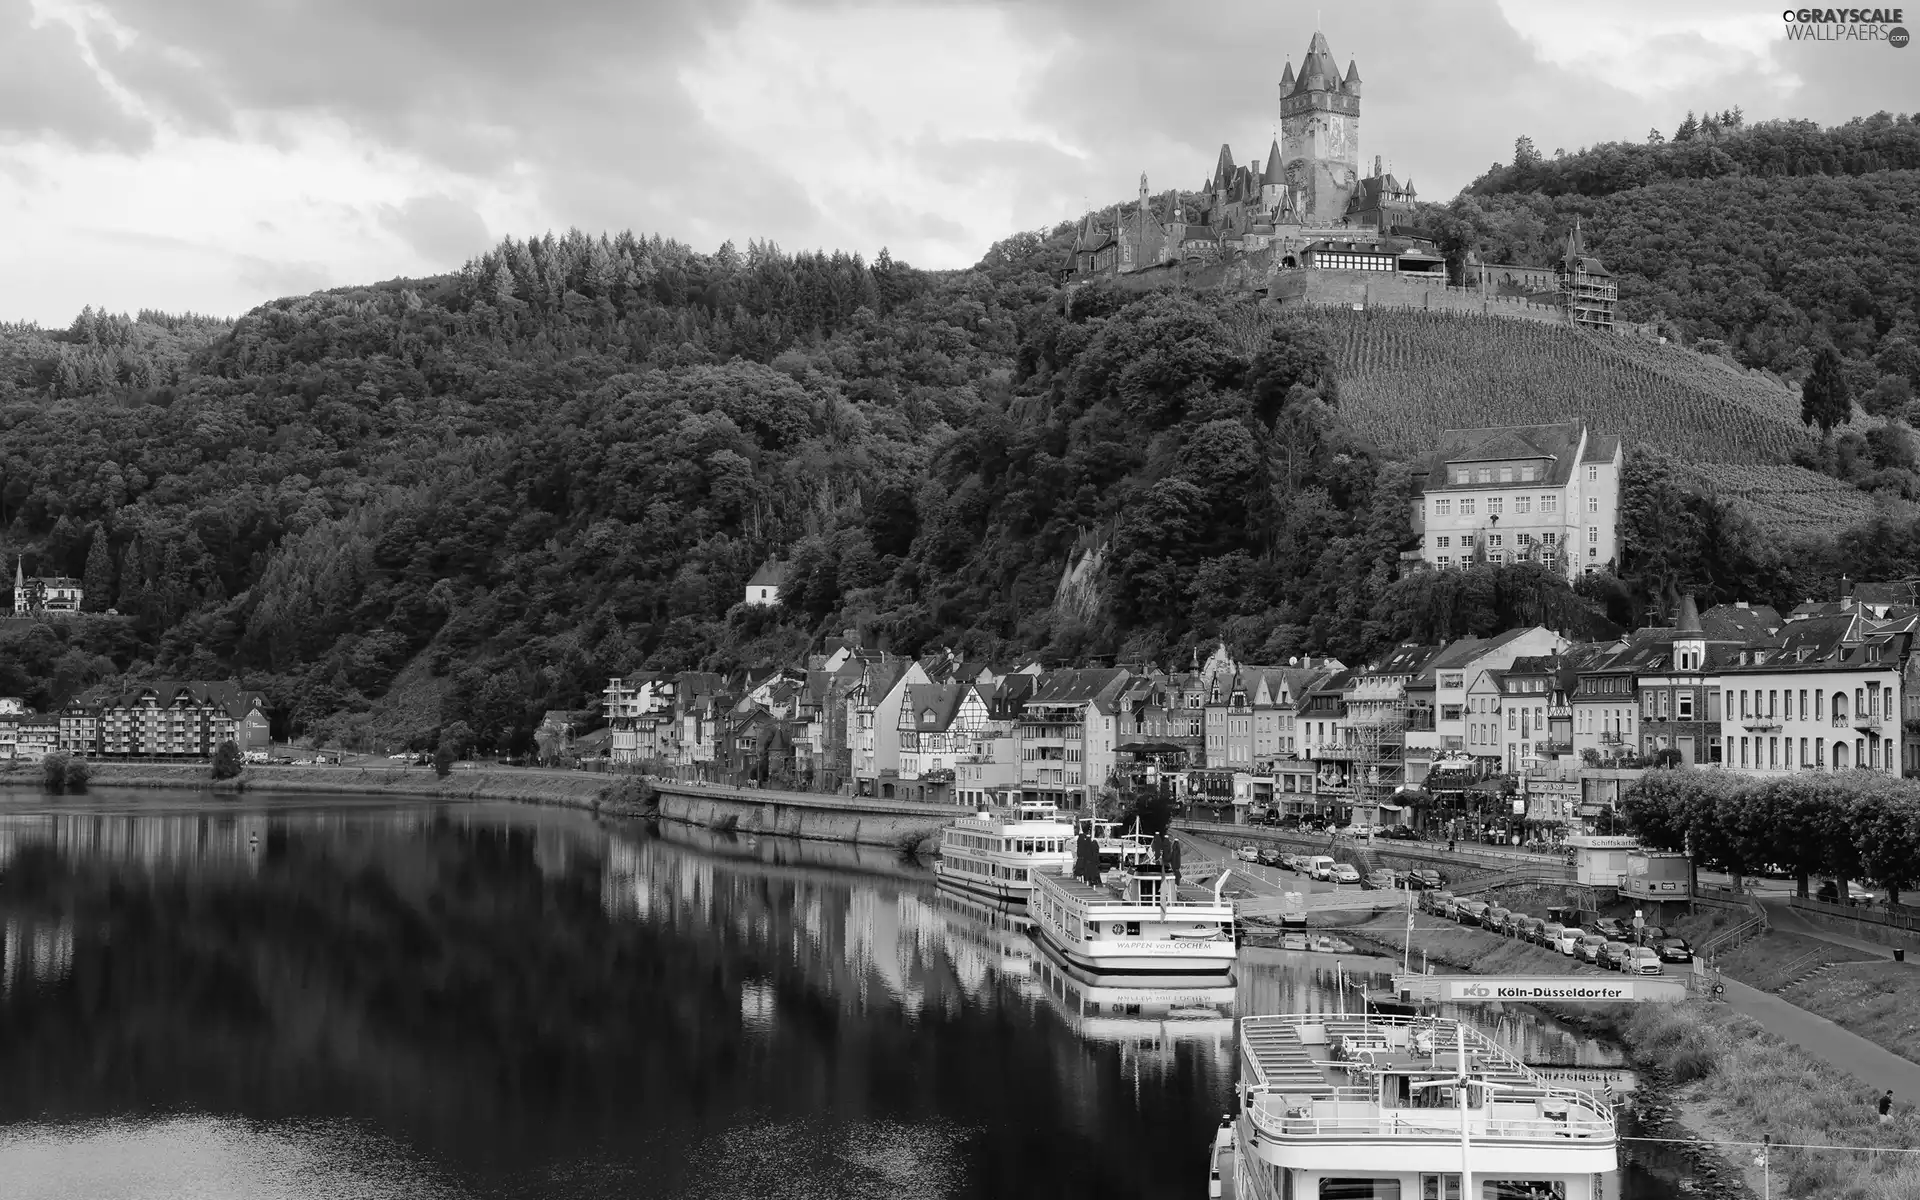 City of Cochem, Reichsburg Castle, The Hills, Moselle River, woods, Rhineland-Palatinate, Germany, vessels